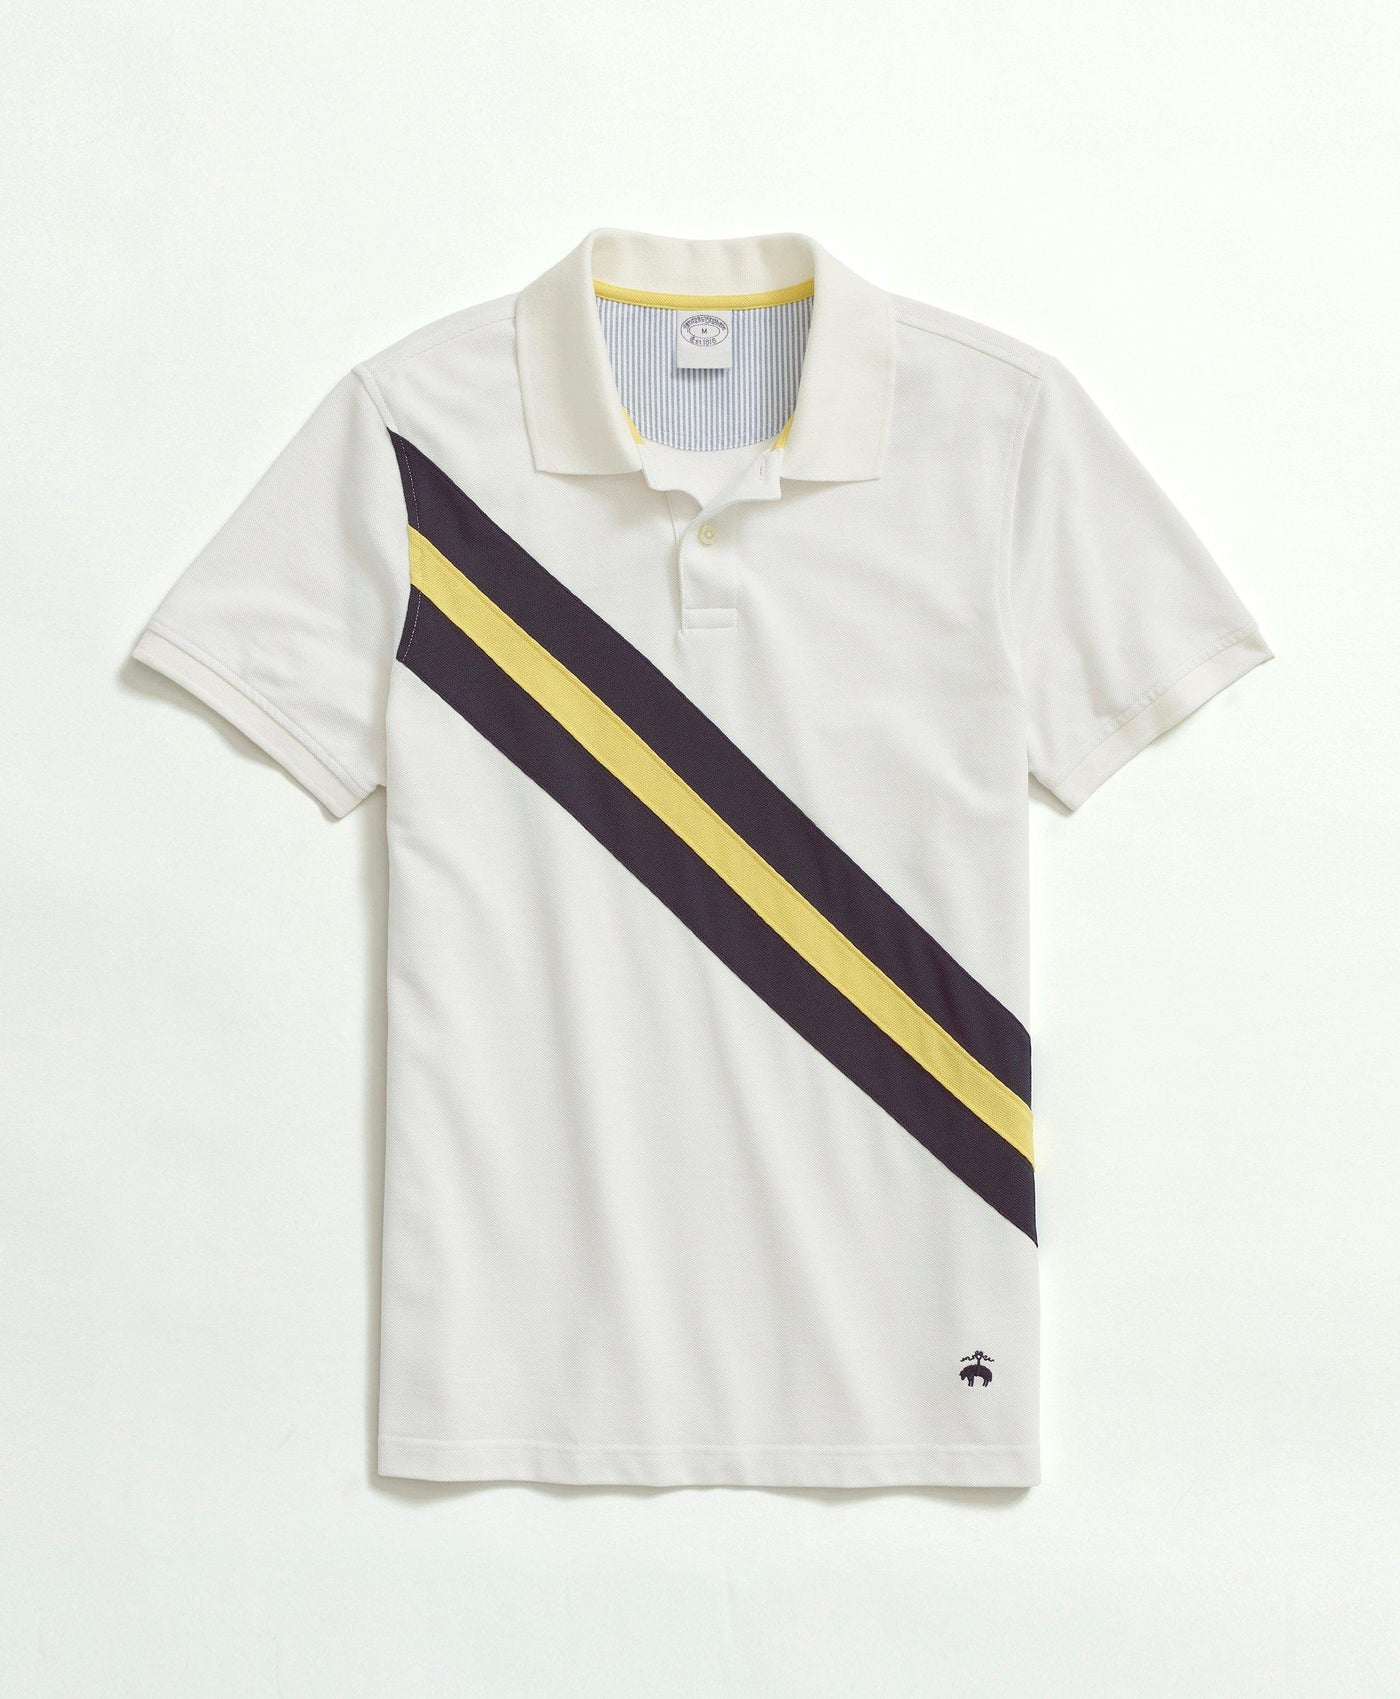 Cotton Pique Archive Stripe Polo Shirt - Brooks Brothers Canada